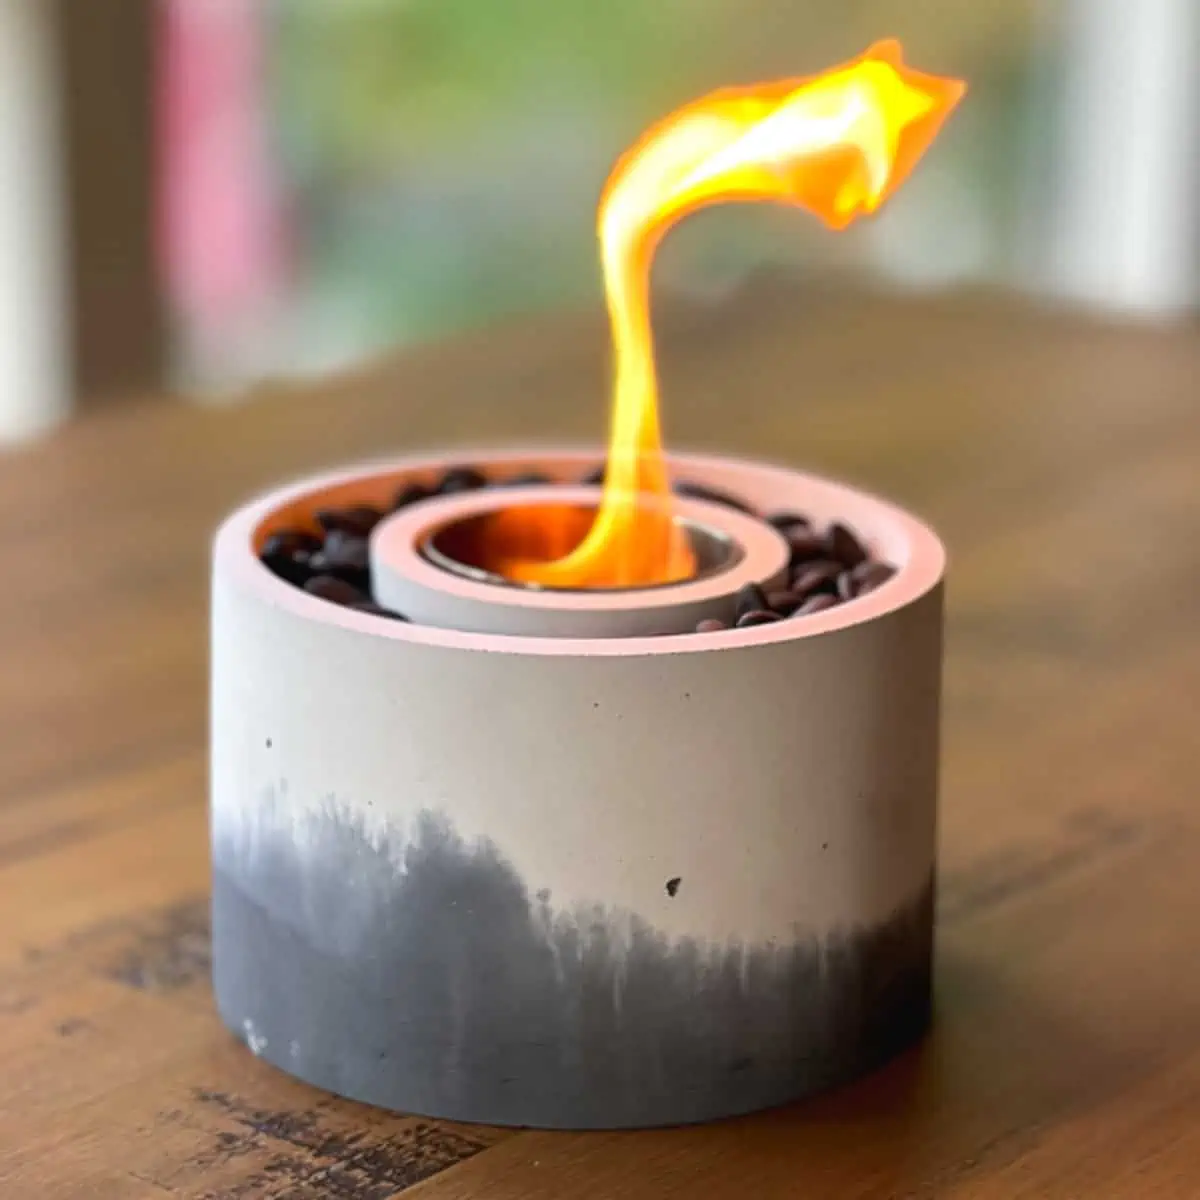 a black ad white marbled-looking concrete bowl on a tabletop with a flame coming out of it, sitting on a table outside.